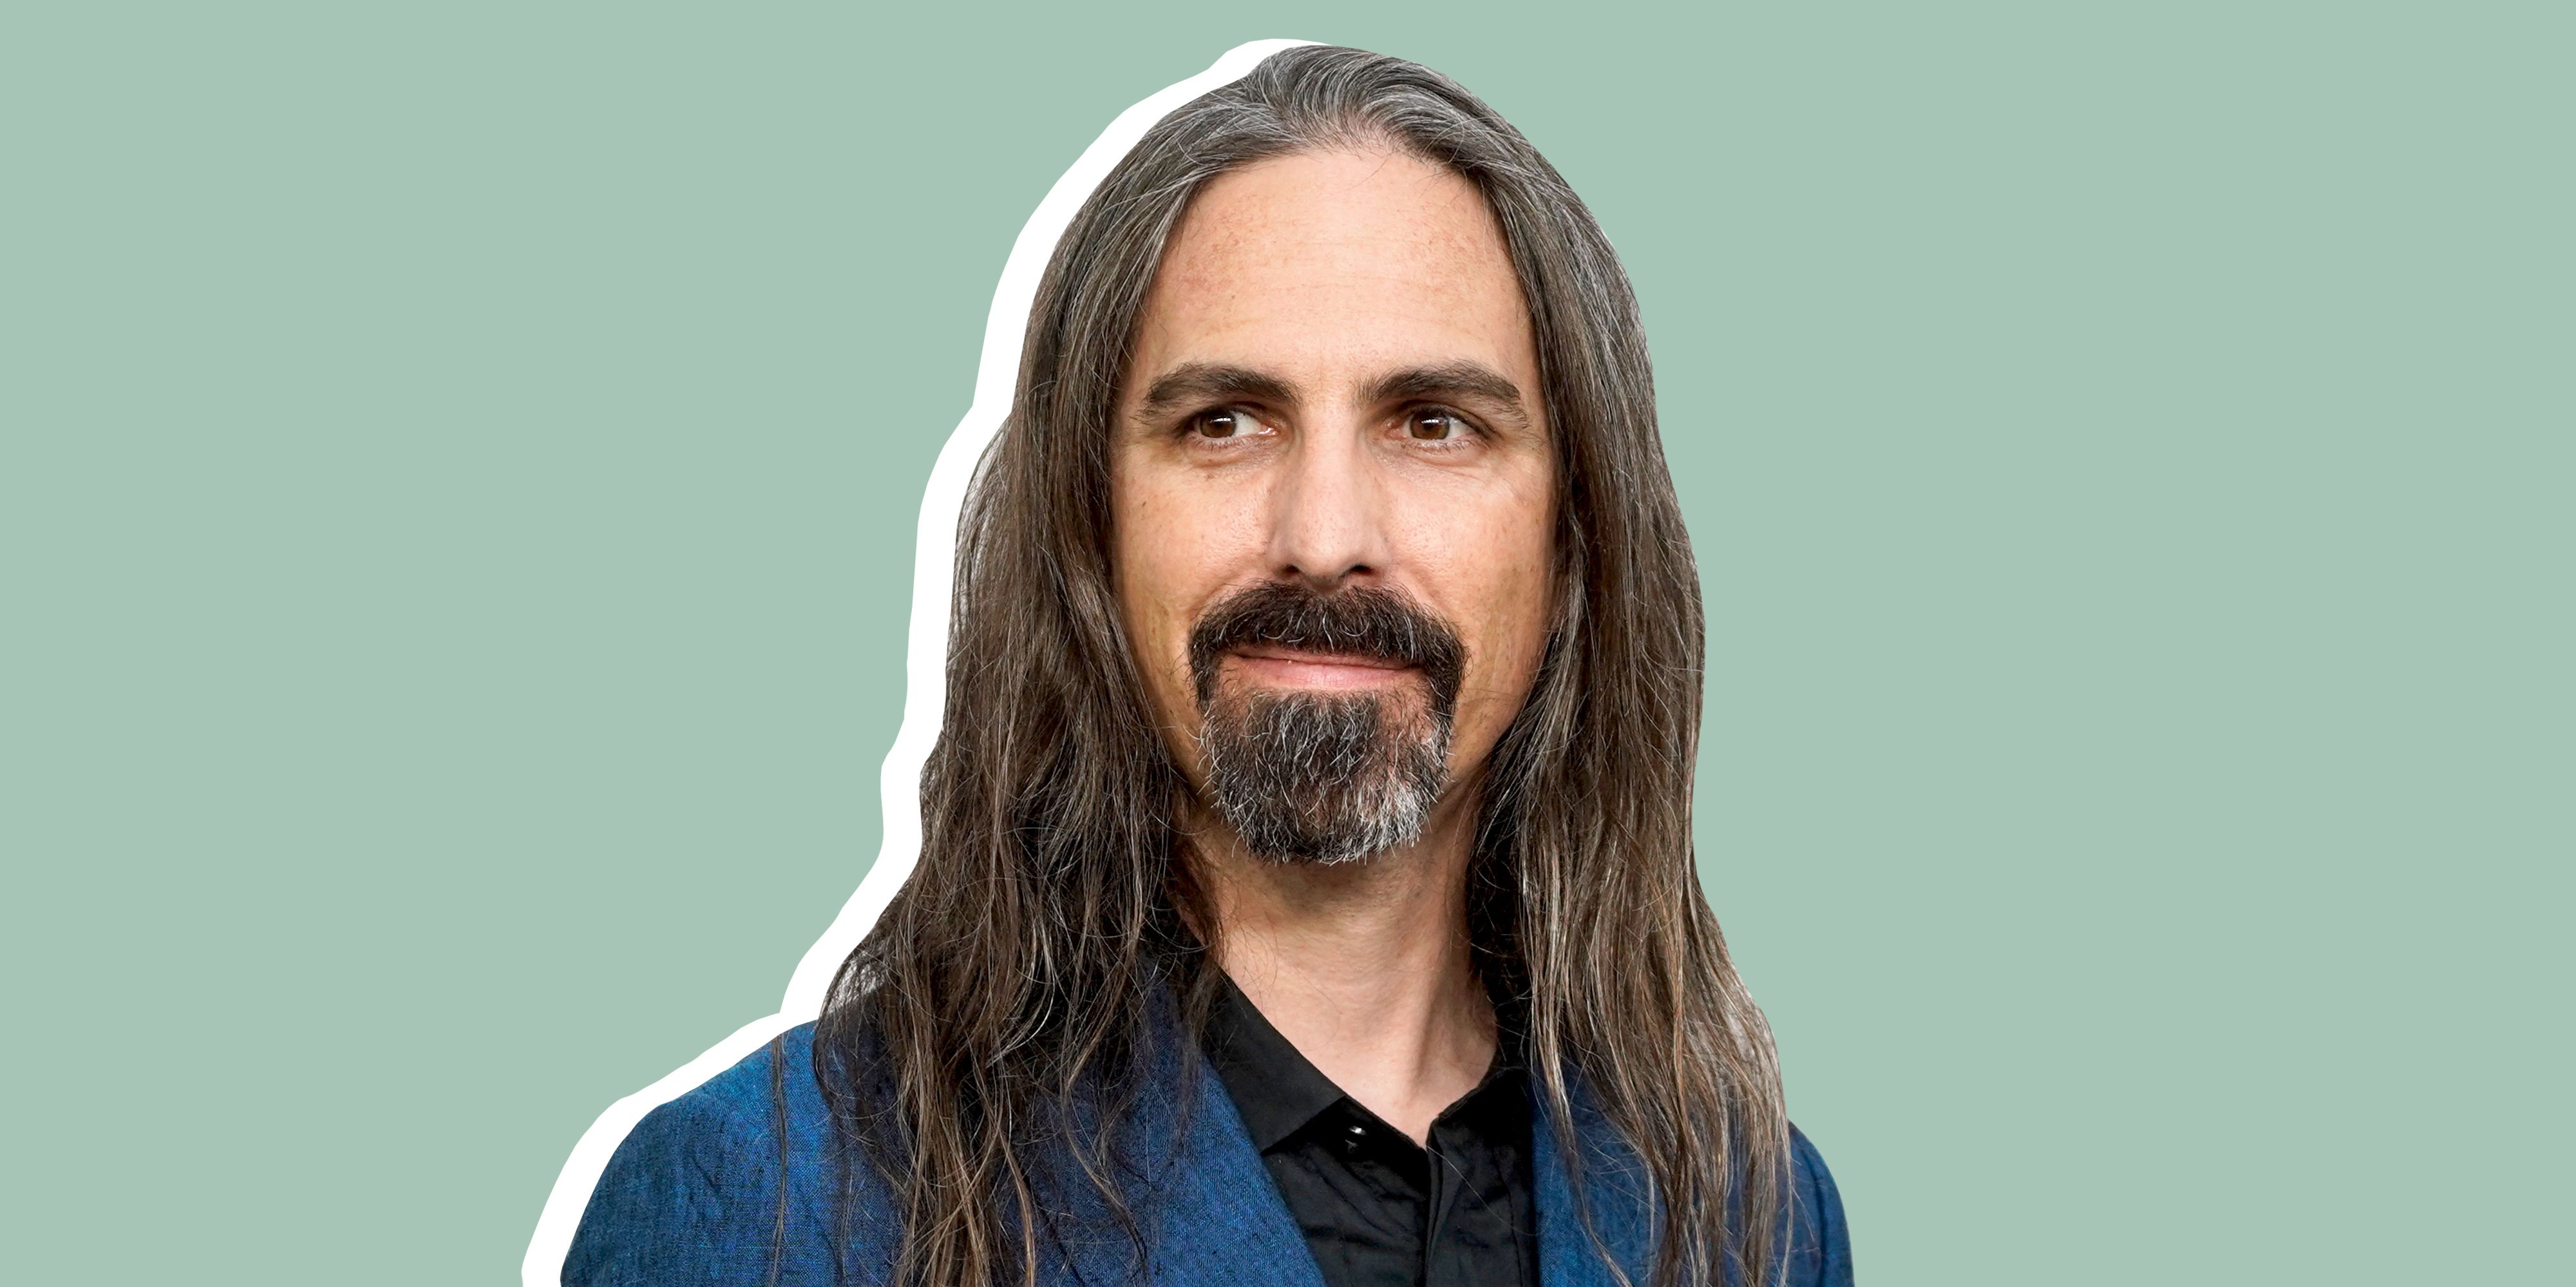 Composer Bear McCreary Interview: LOTR The Rings of Power